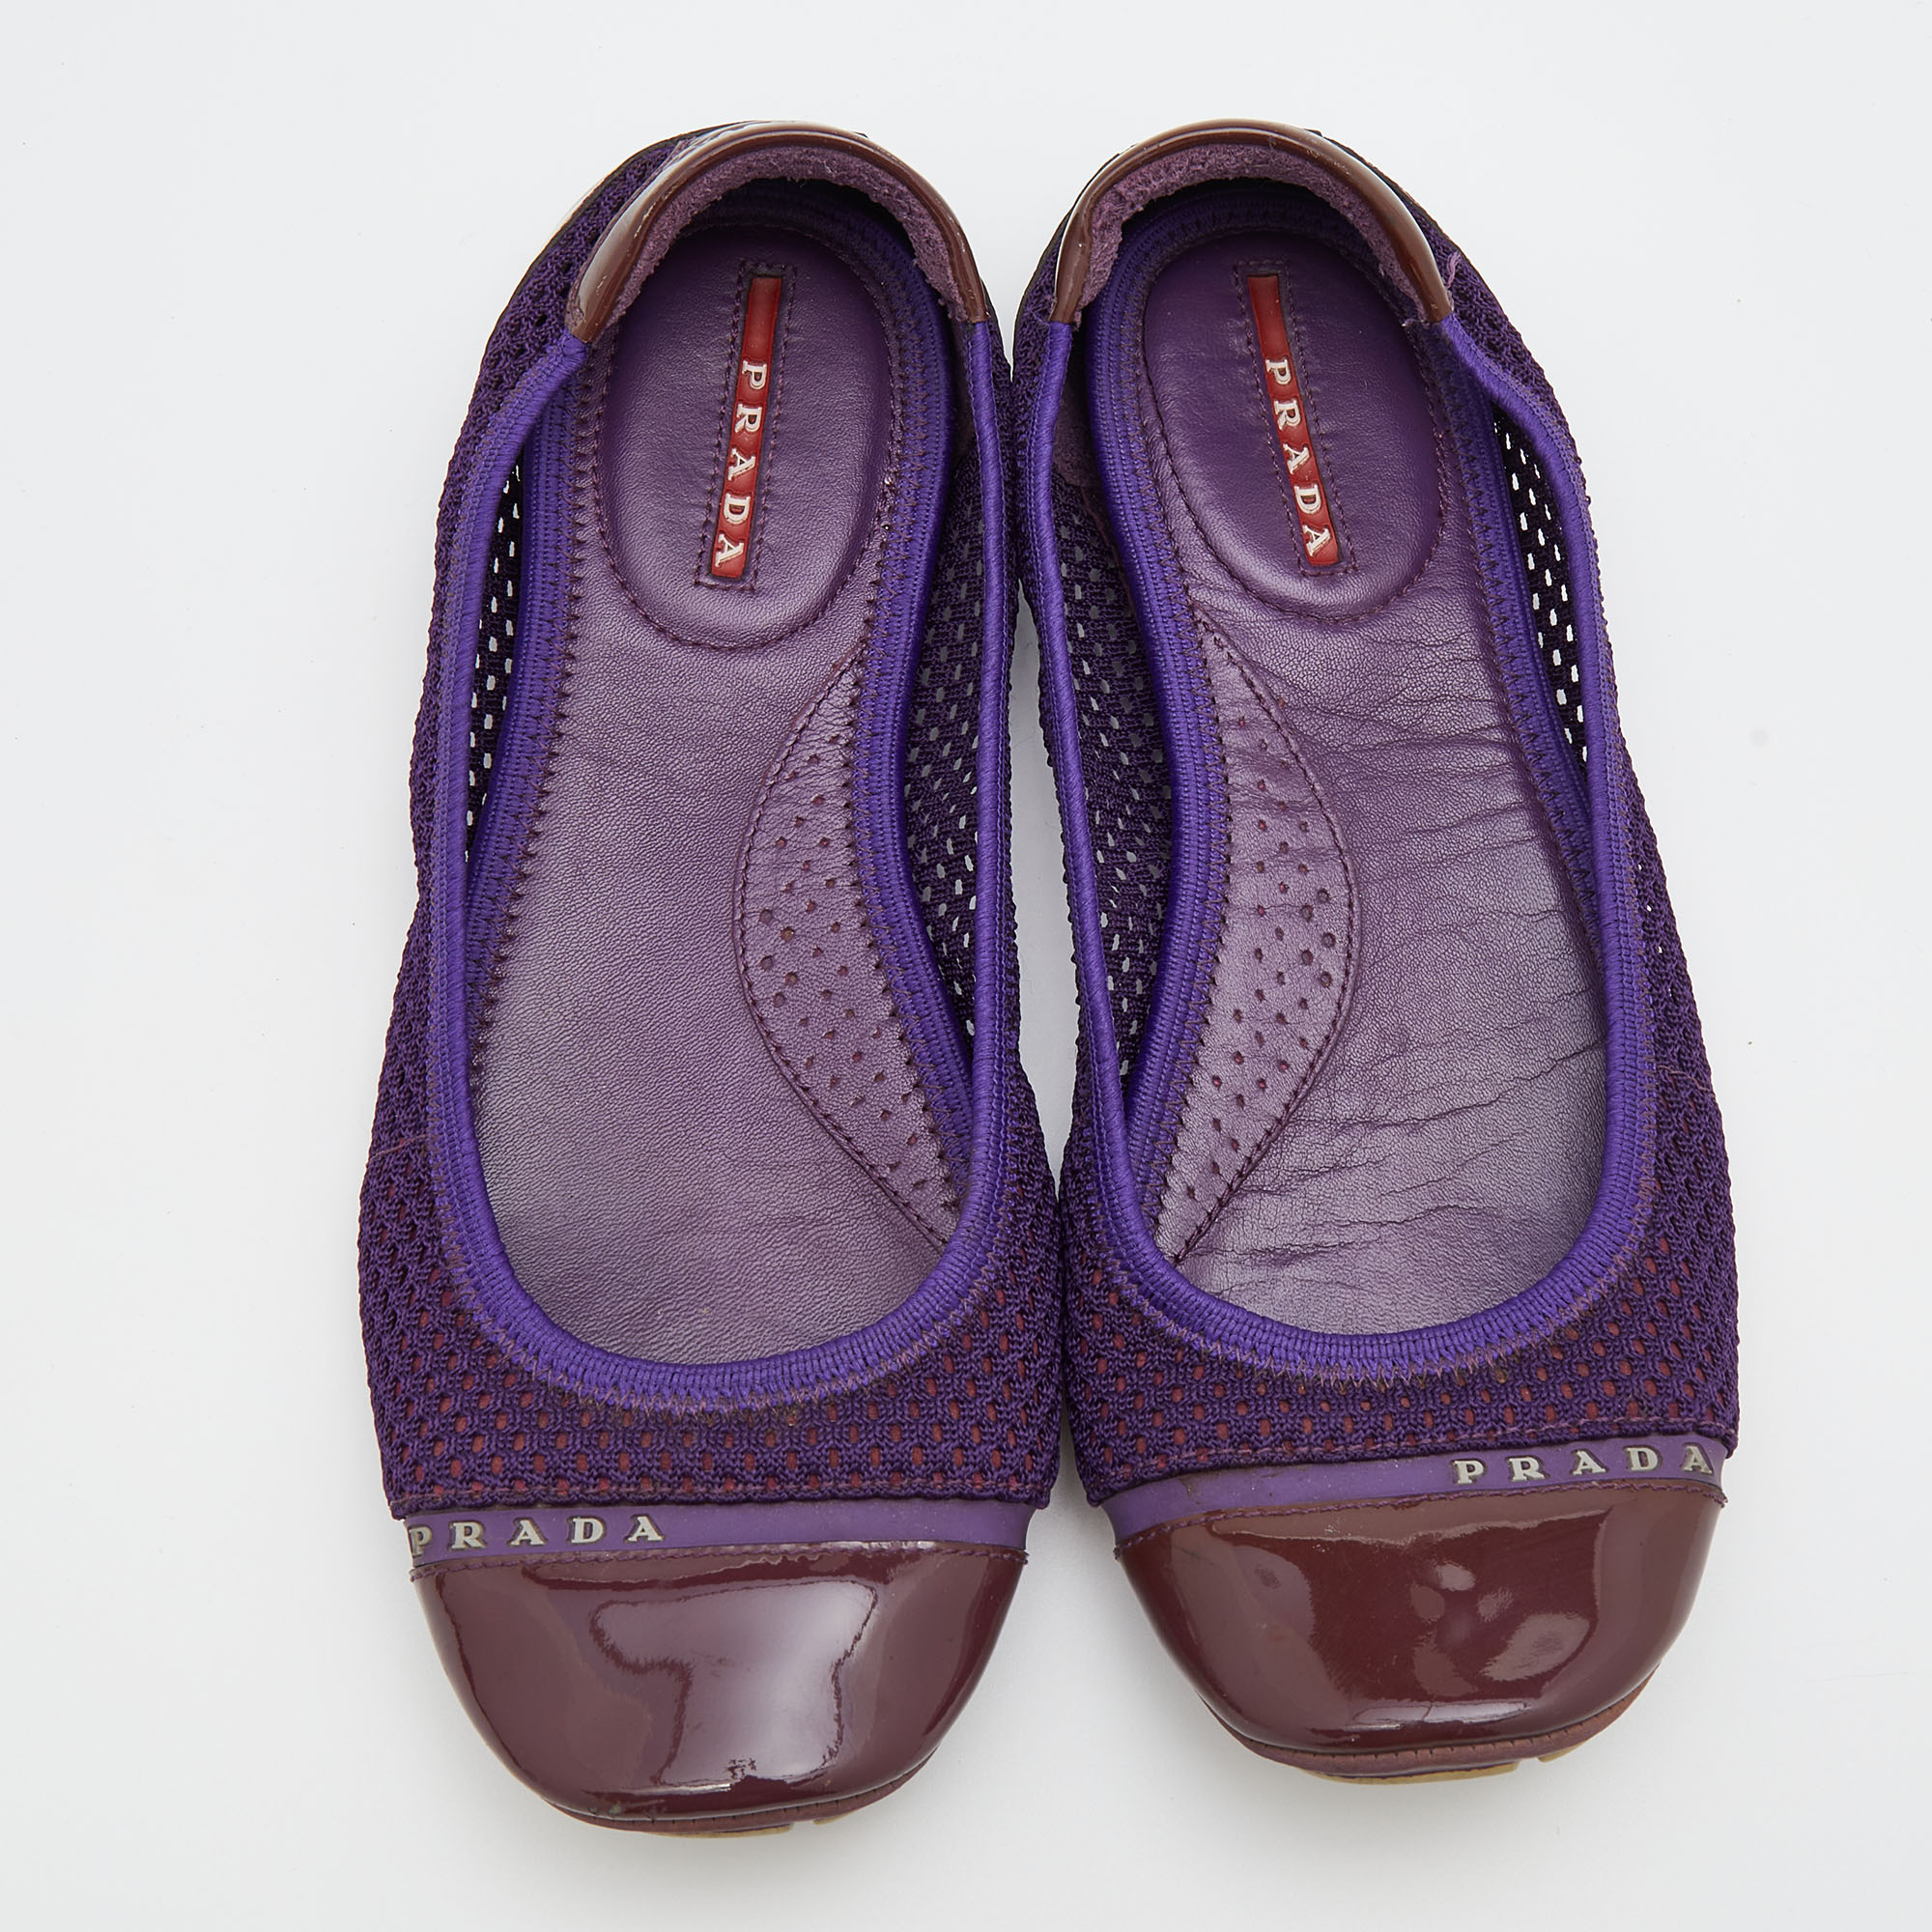 Prada Sport Purple/Brown Mesh And Patent Leather Ballet Flats Size 37